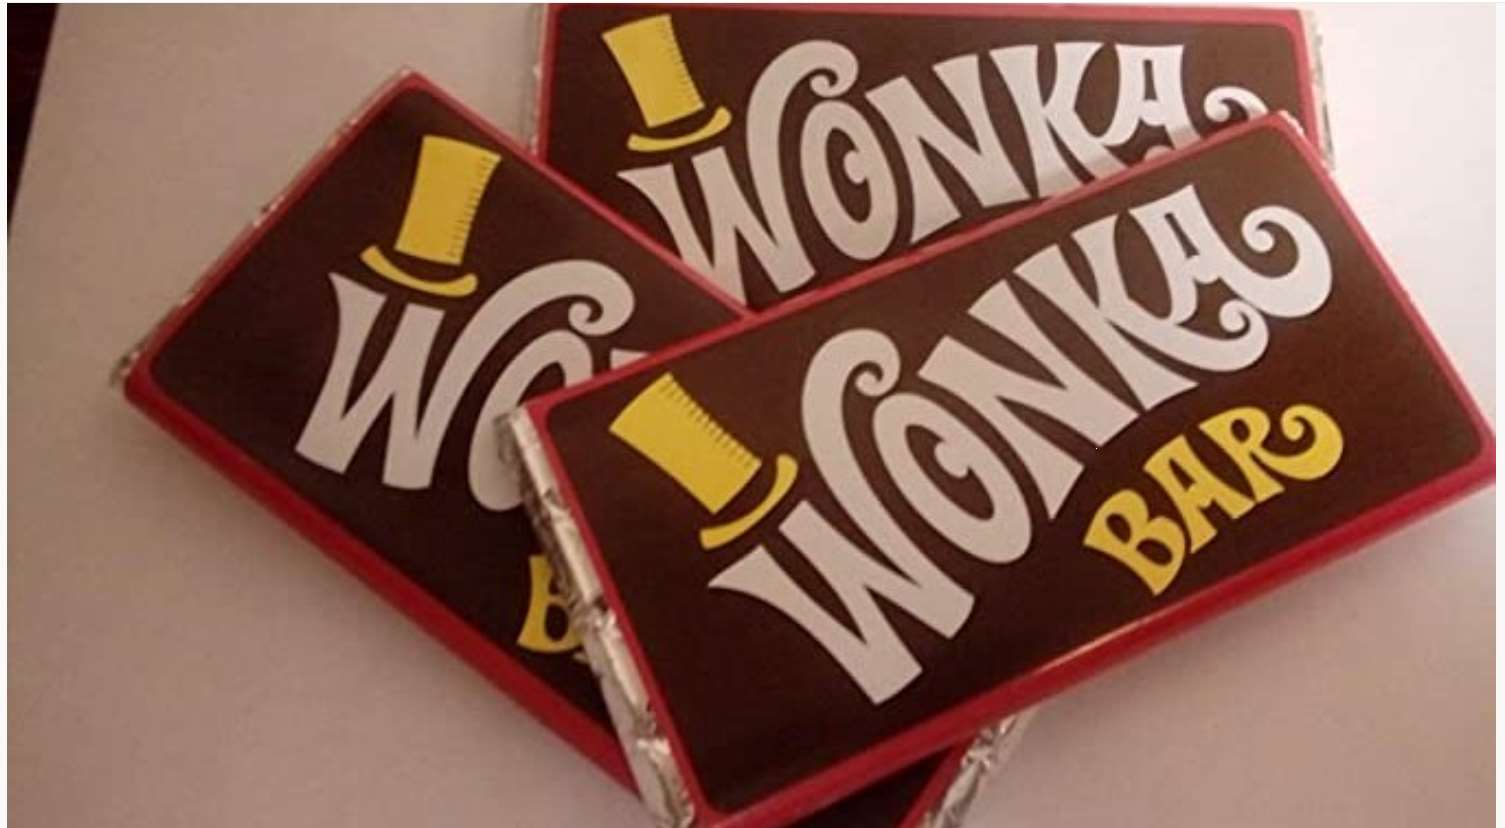 The FSA has warned that Wonka chocolate bars sold in stores, online or on market stalls ‘will not be the real thing’ (FSA/PA)